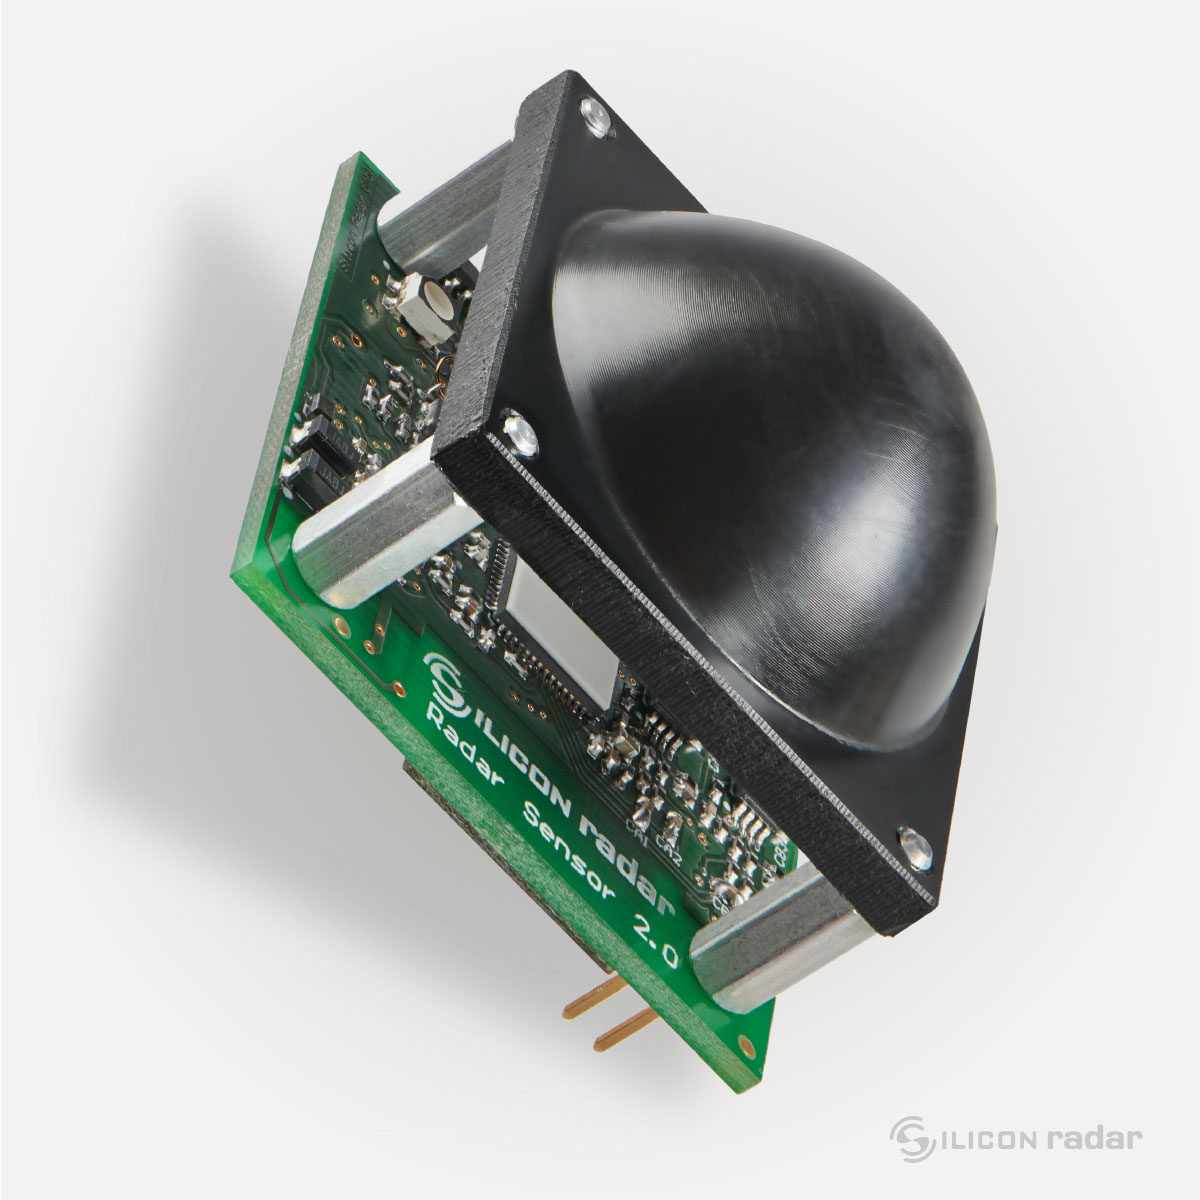 Radar Evaluation Kits for various Front Ends - Silicon Radar GmbH